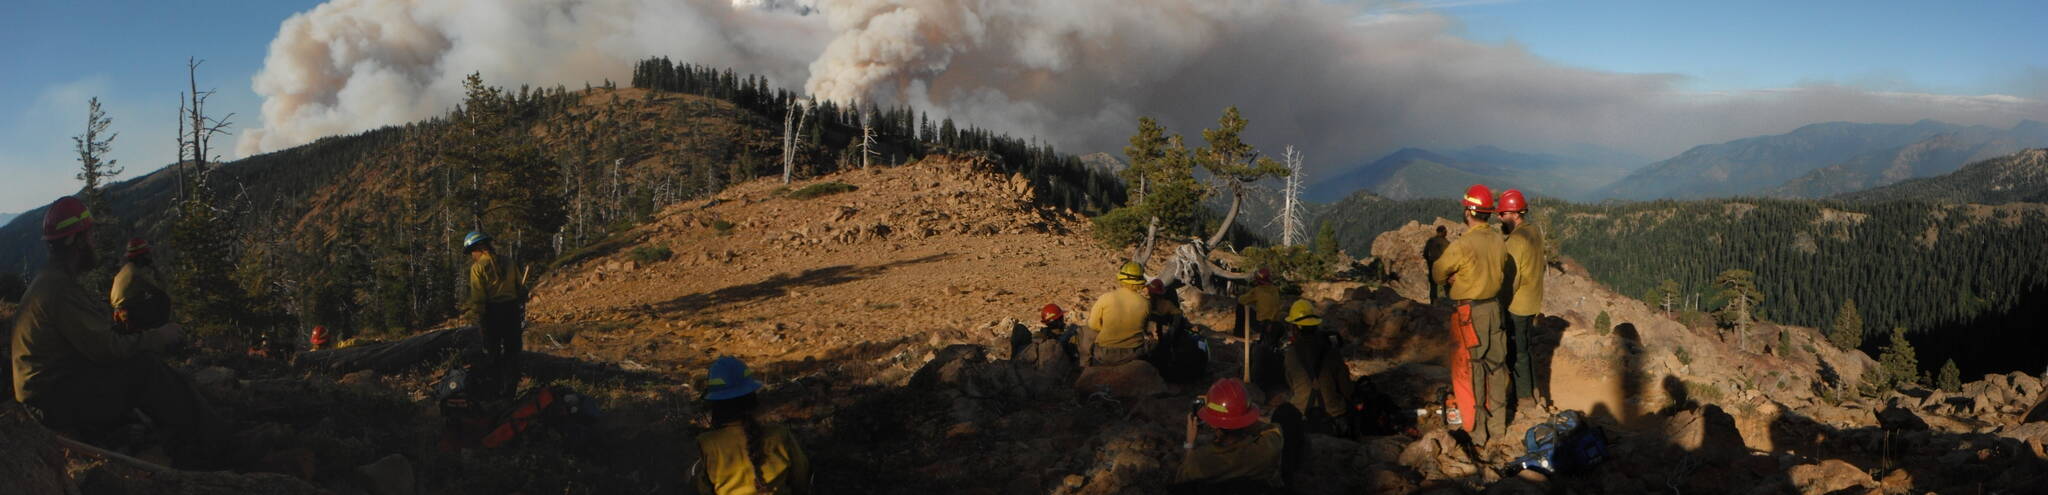 Courtesy photo / Parker Anders
A Forest Service fire crew surveys a break in a ridgeline during an operation. Fire crews from Alaska are frequently deployed to the Lower 48 to help combat wildfires that are growing larger and closer to urban areas in many cases.